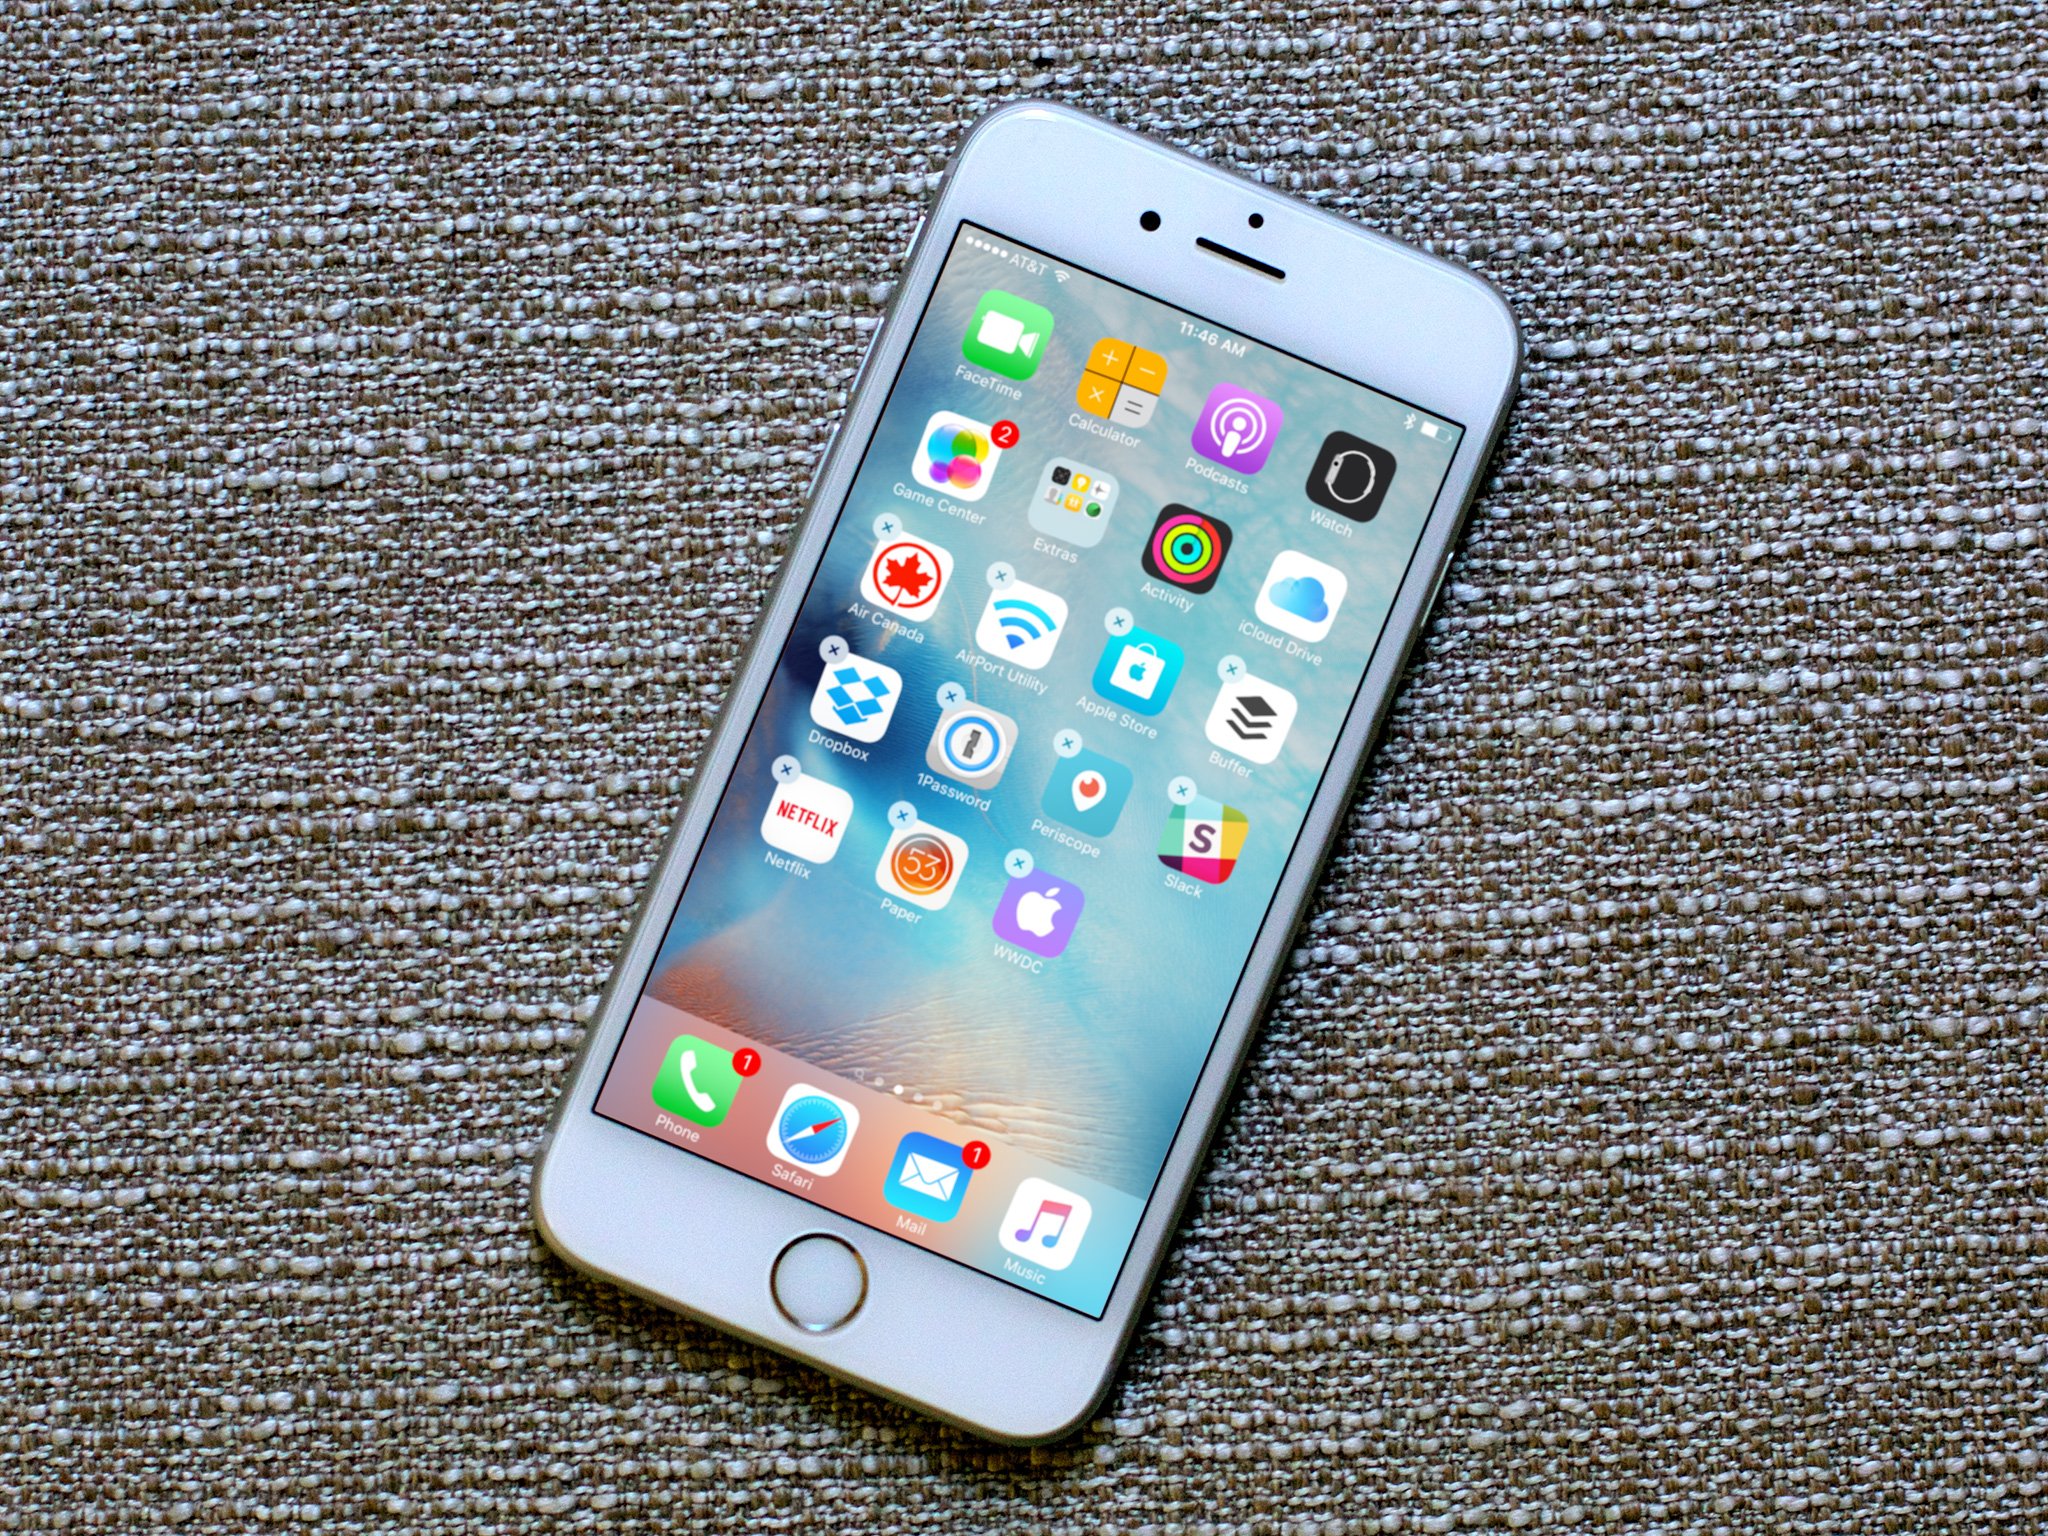 How to move or delete apps in the 3D Touch world of iPhone 6s